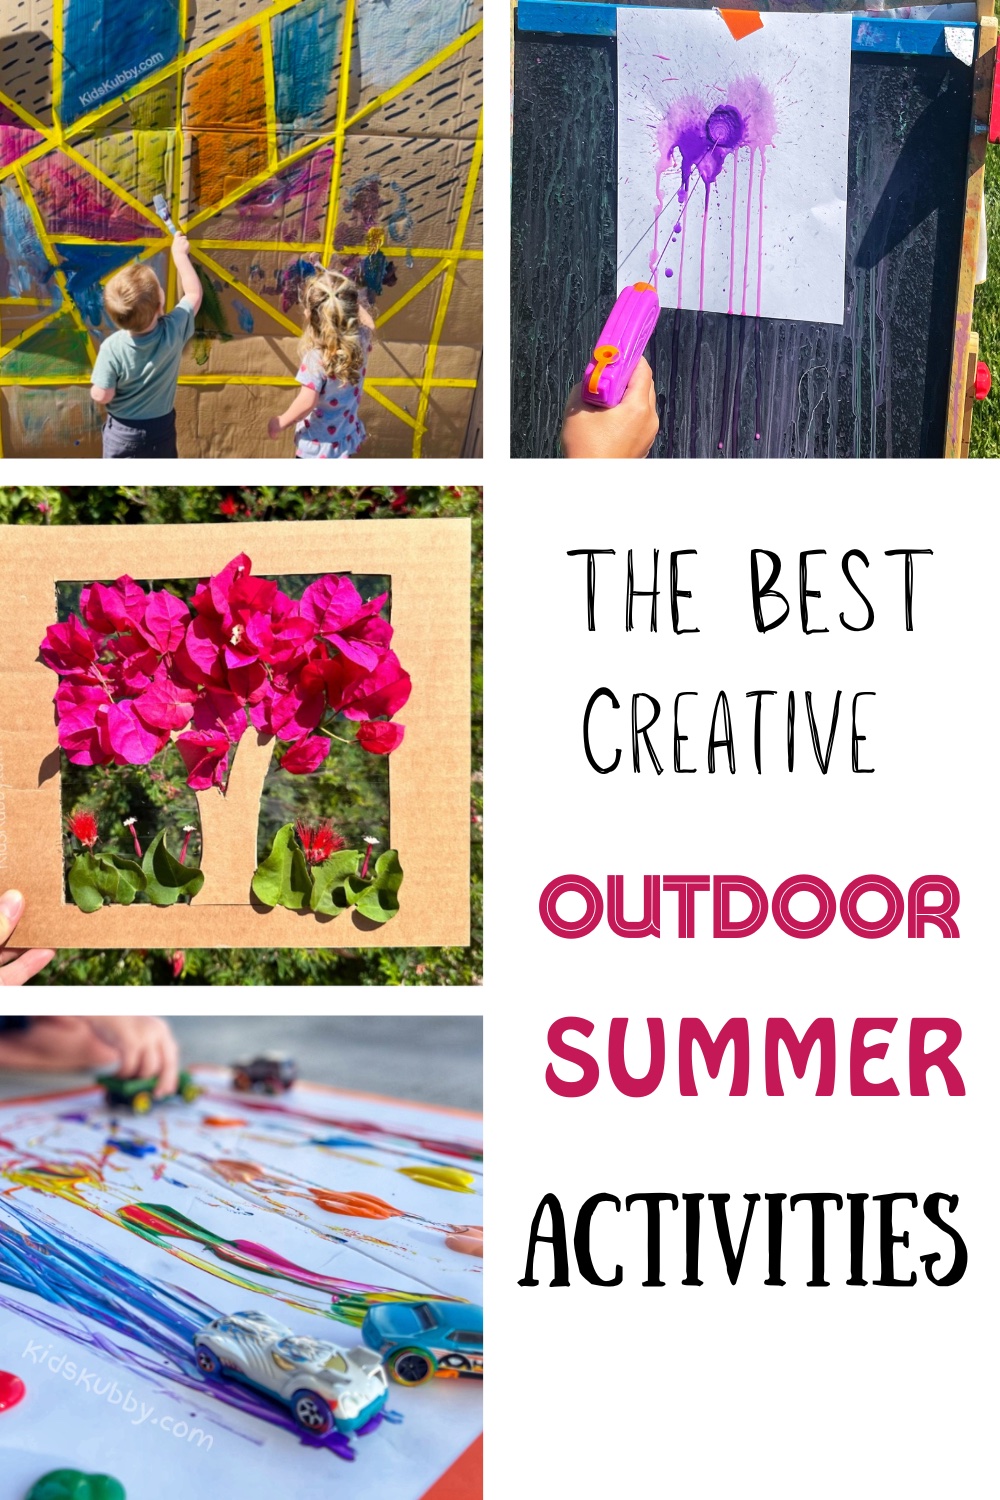 Unplug your kids and get outside this summer and ignite their creativity with these exciting, action-packed activities for making it a fun, colorful and unforgettable summer!